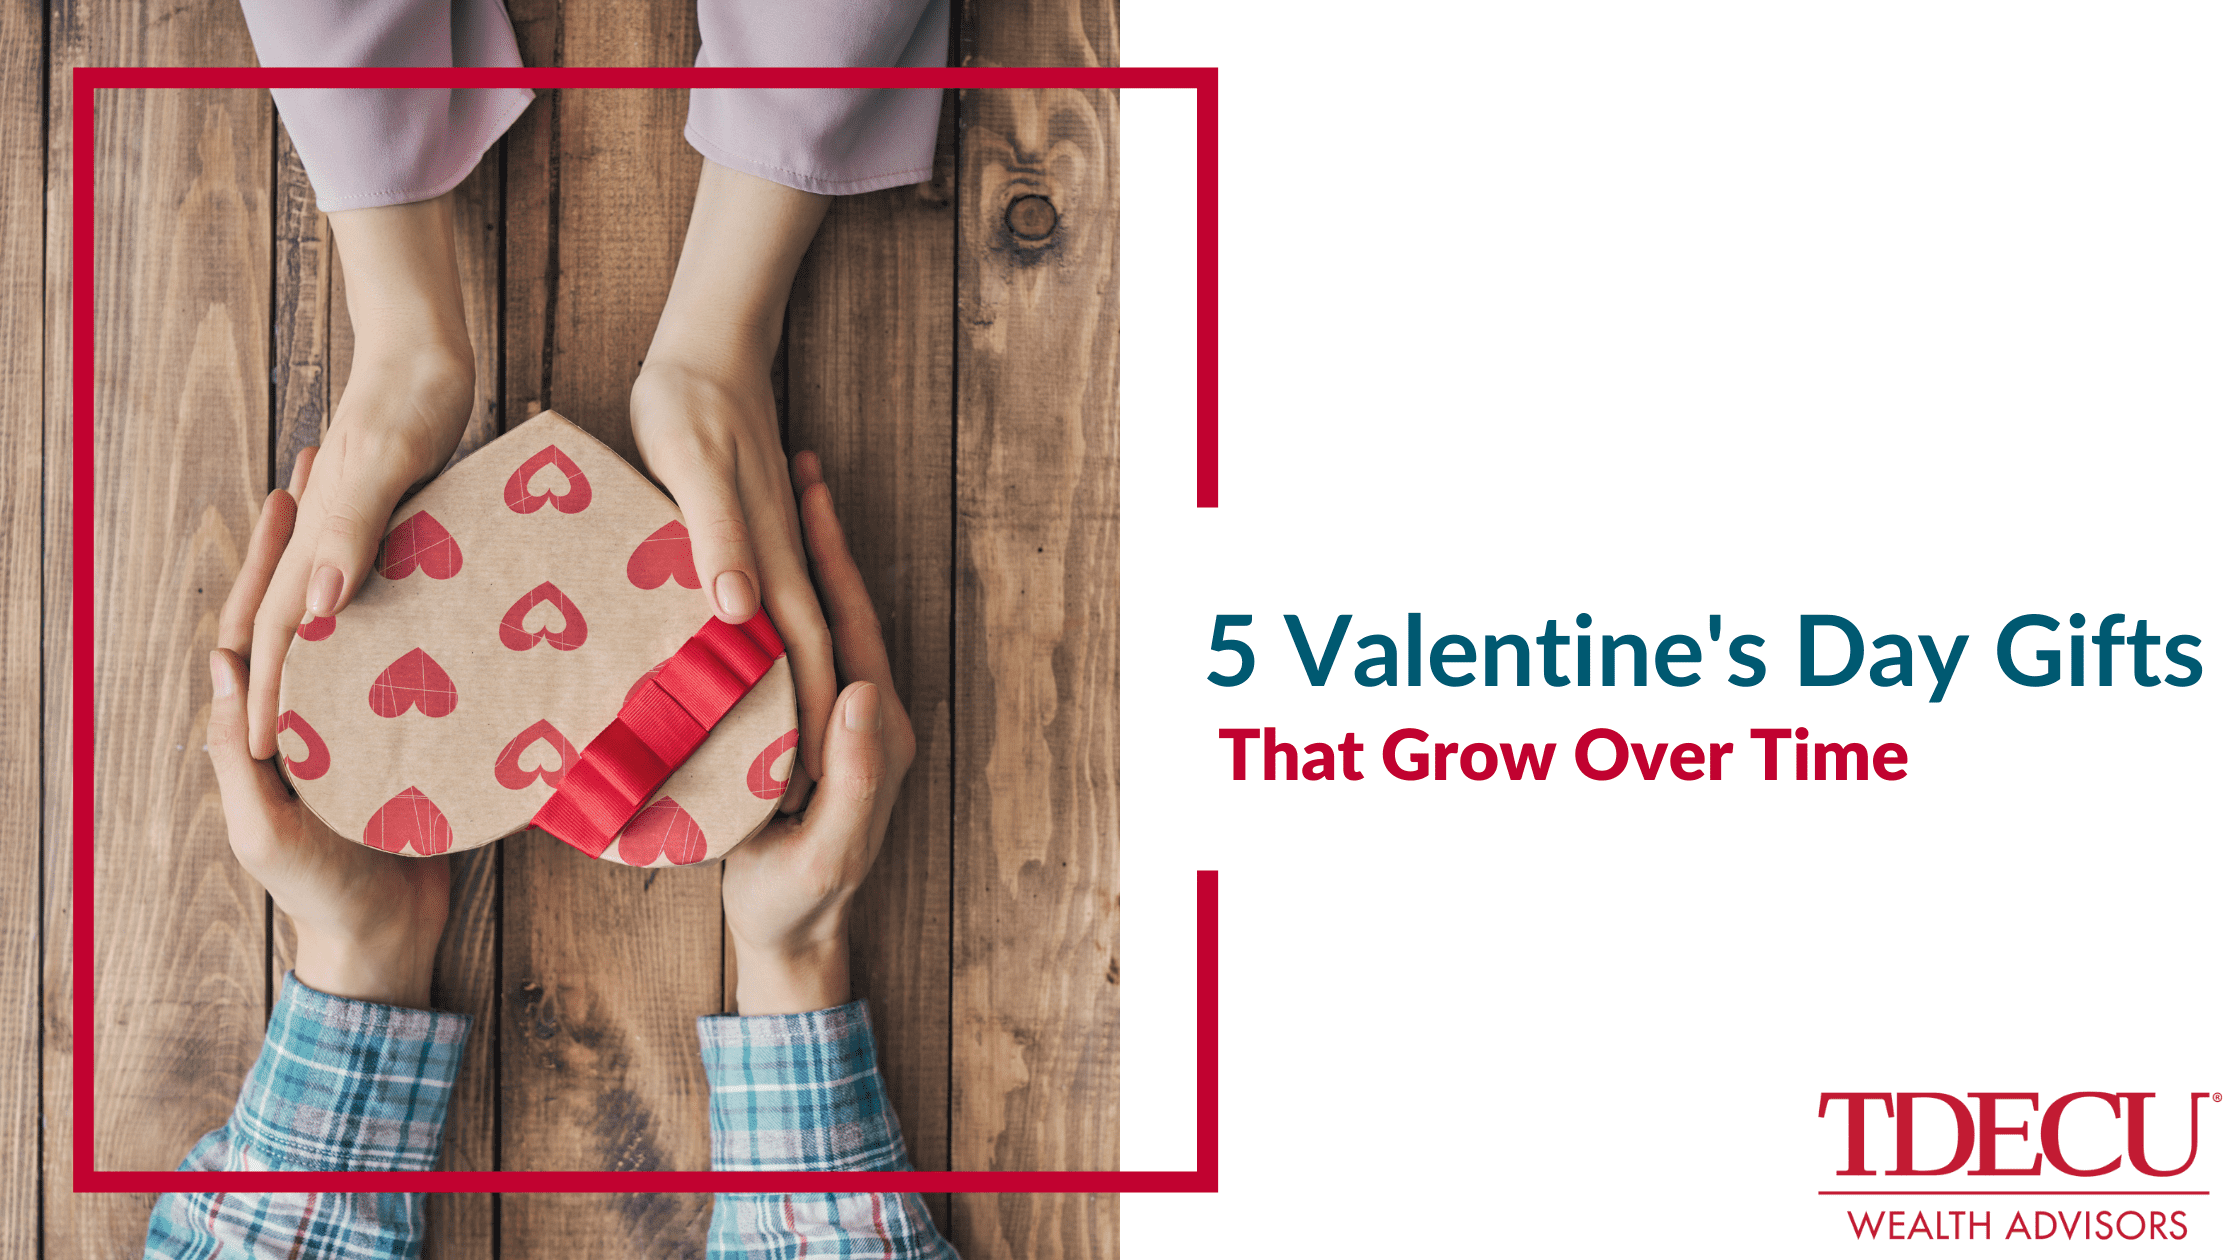 5 Valentine's Day Gifts that Grow in Value Over Time